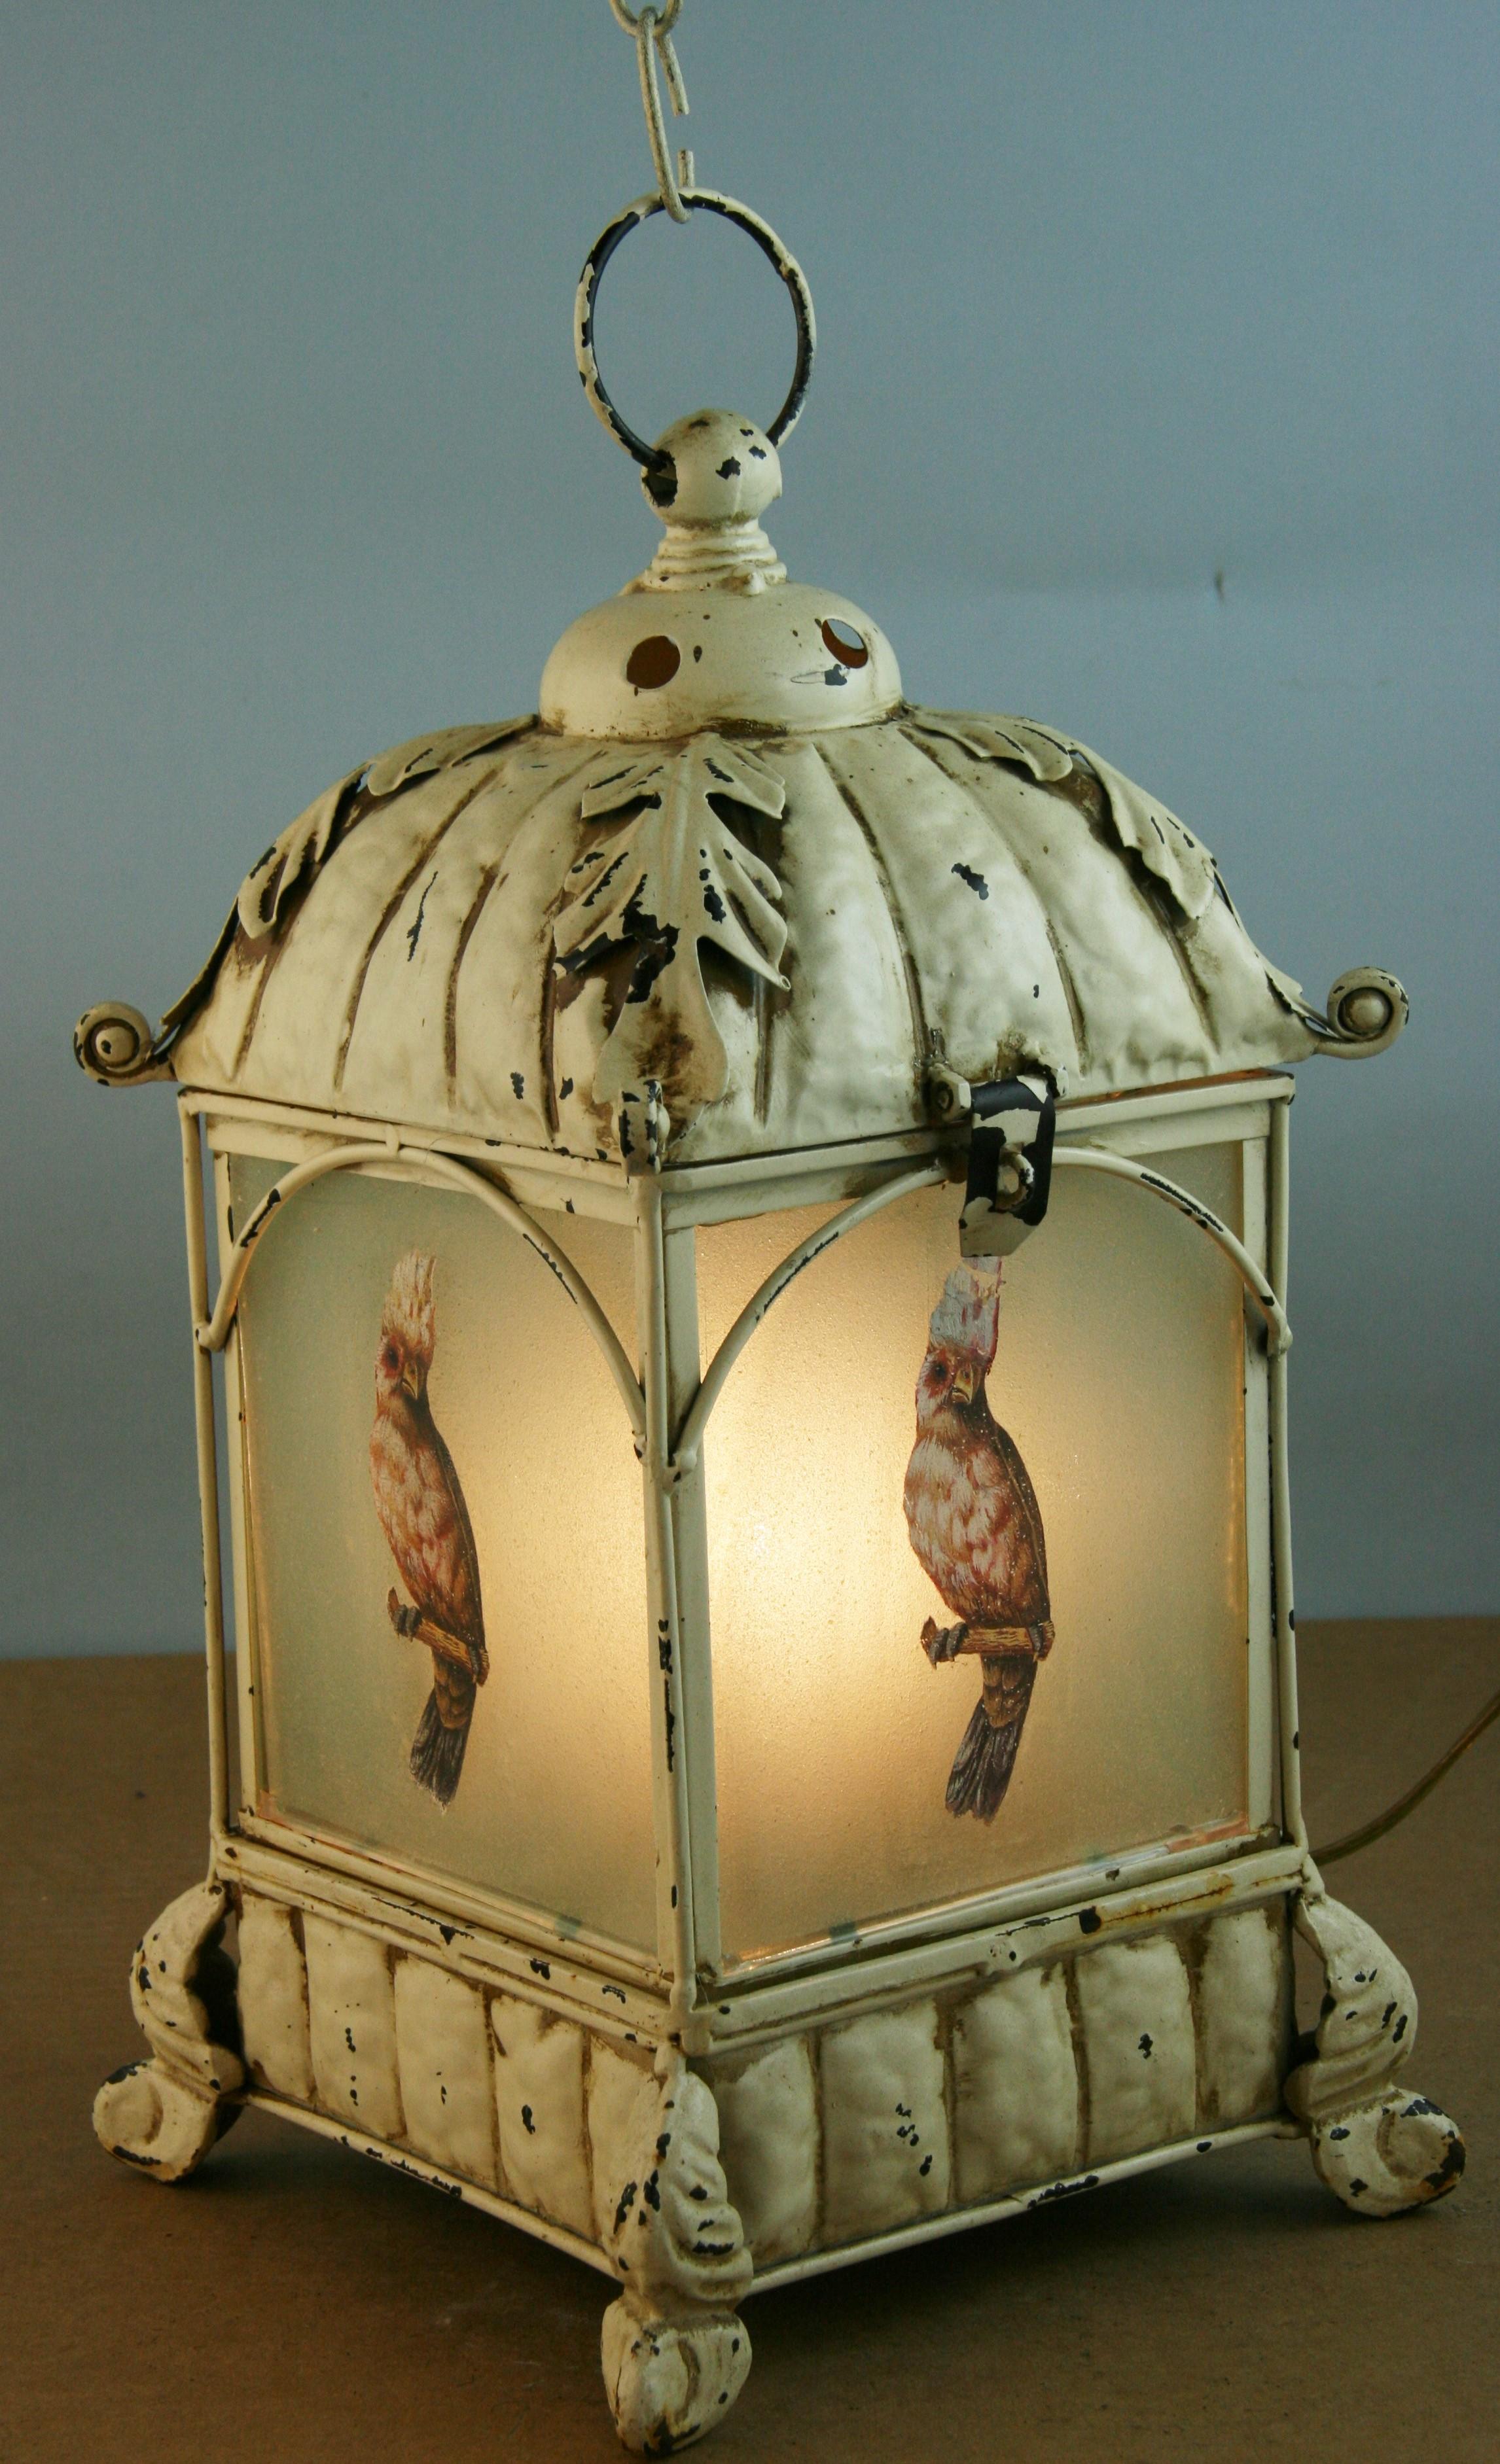 Rare ornate garden candle lantern with parrot decorated glass panels with 2 feet antique chain.